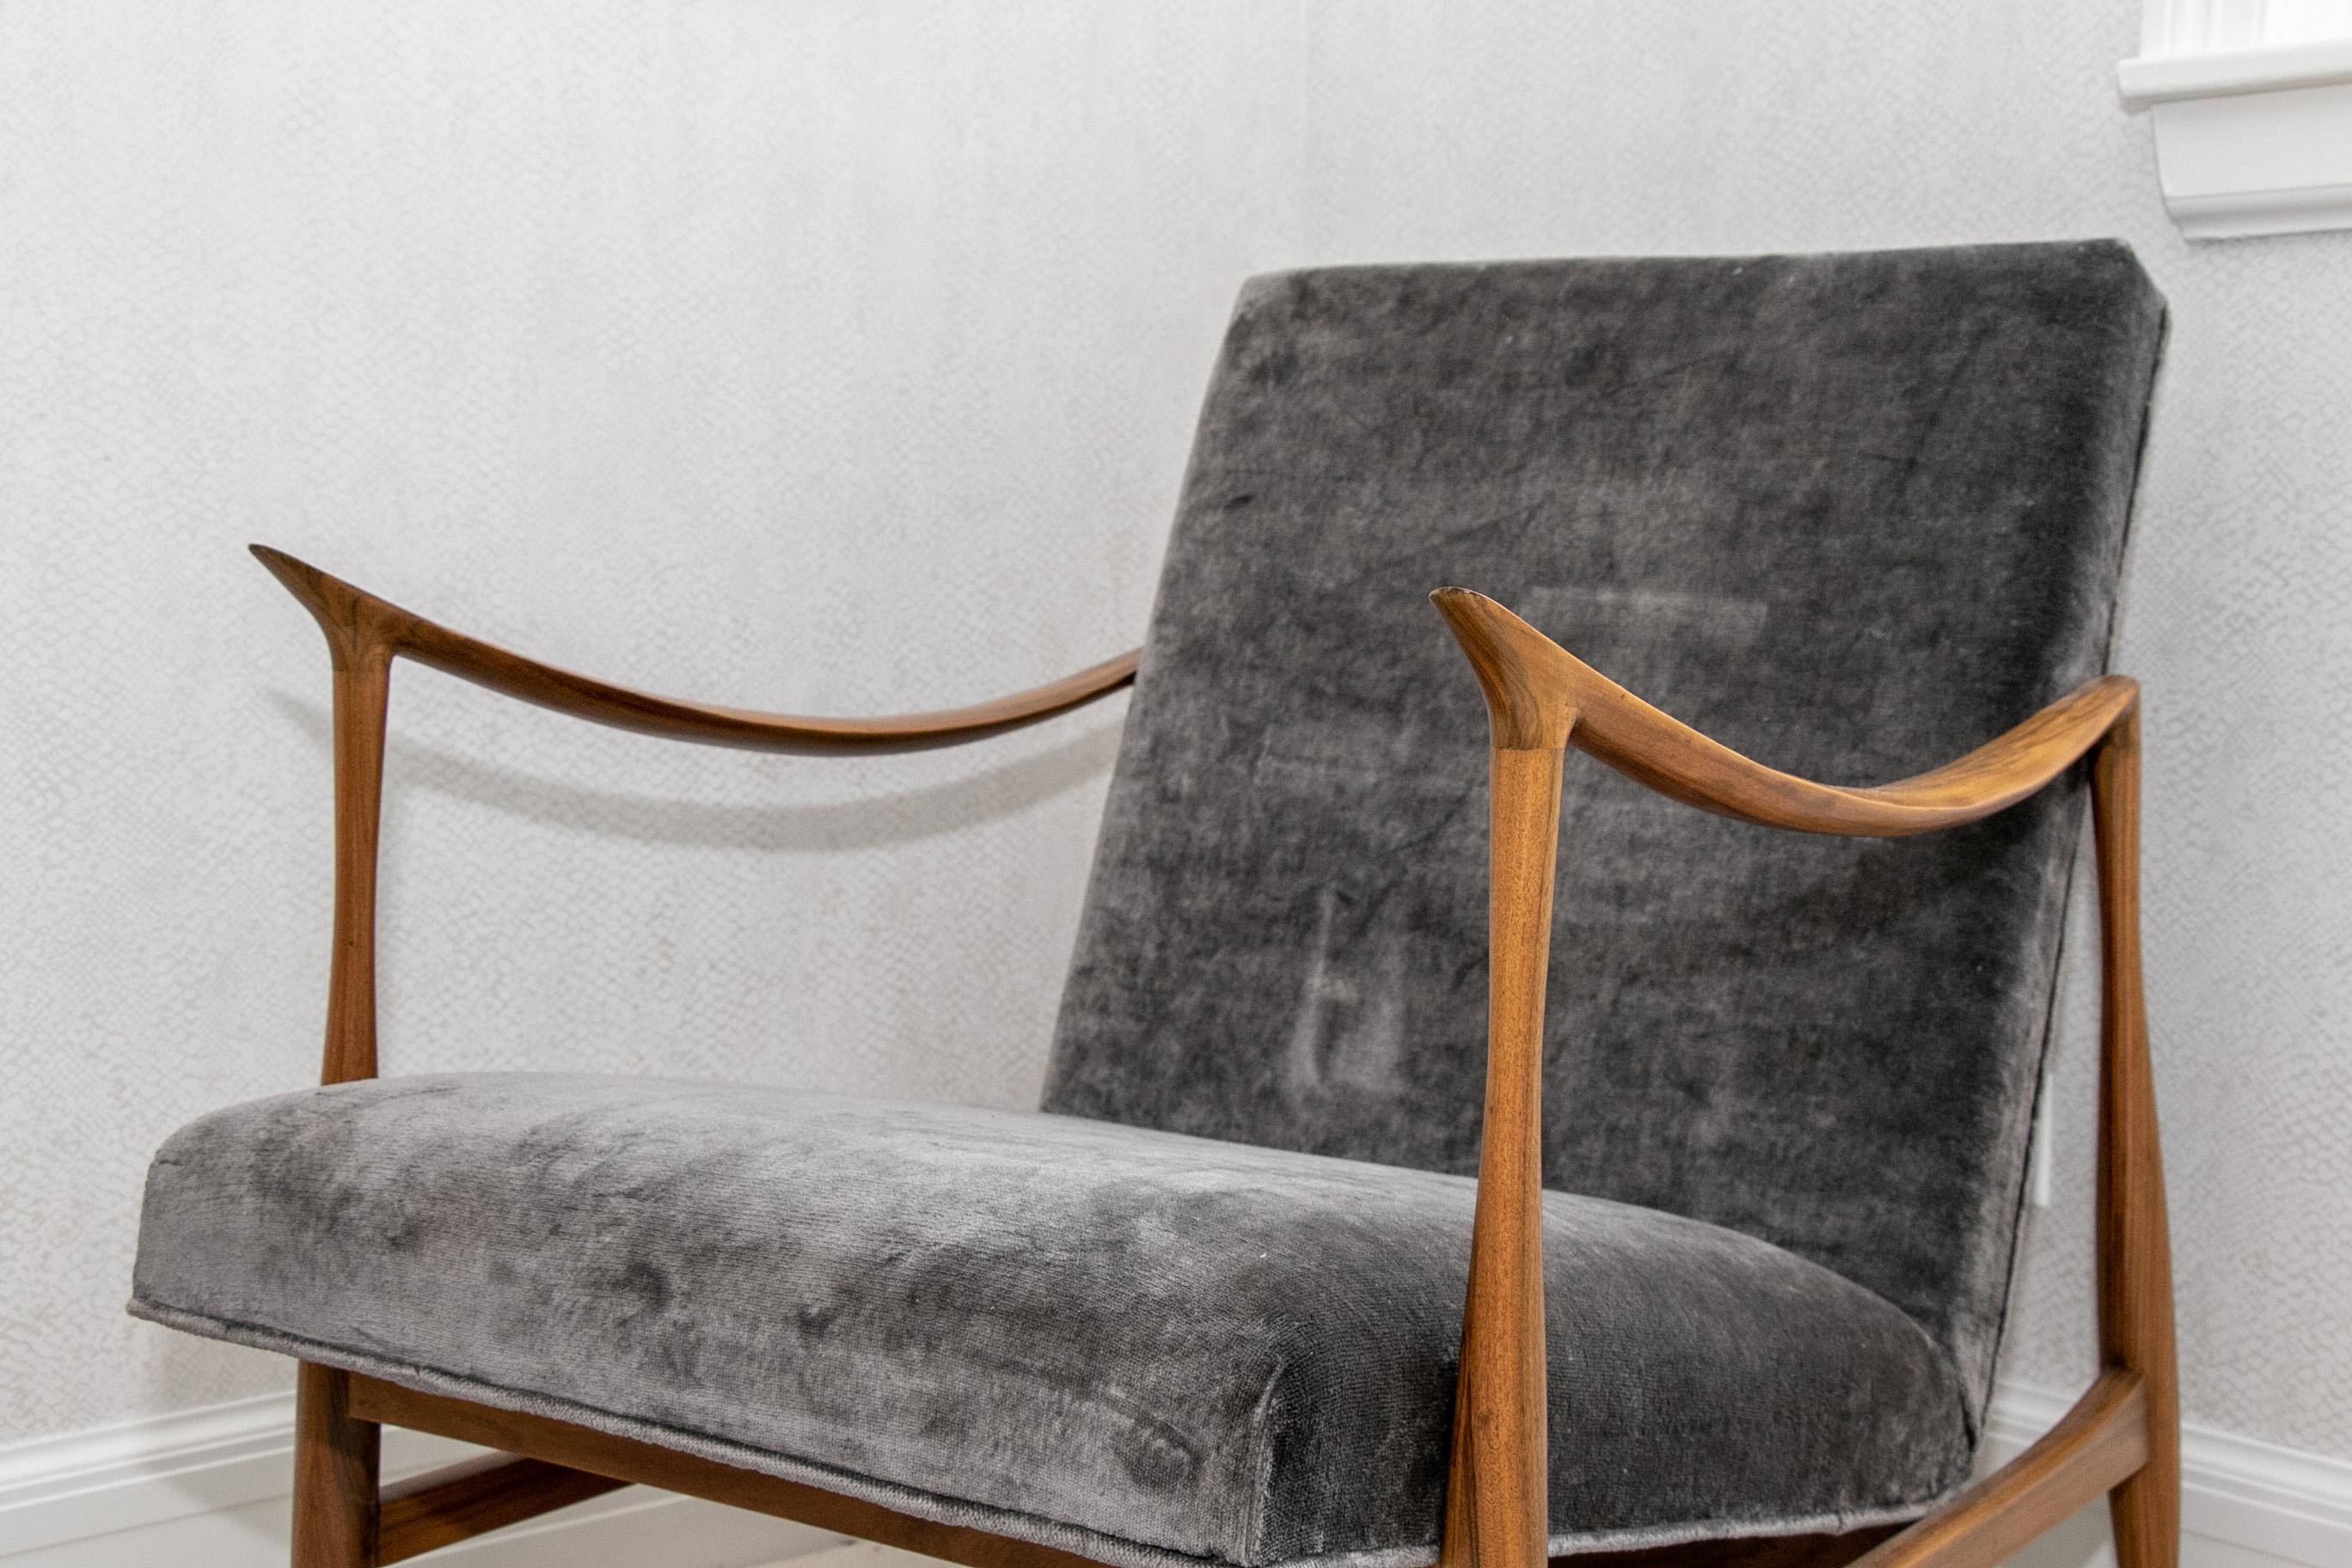 Danimarquesa chair by Jorge Zalszupin, exceptional midcentury Design lounge chair with custom upholstery. Fine wood with gently curved arms and the softest hand imaginable. Authorized re-issue.

Condition: Good condition with expected signs of use